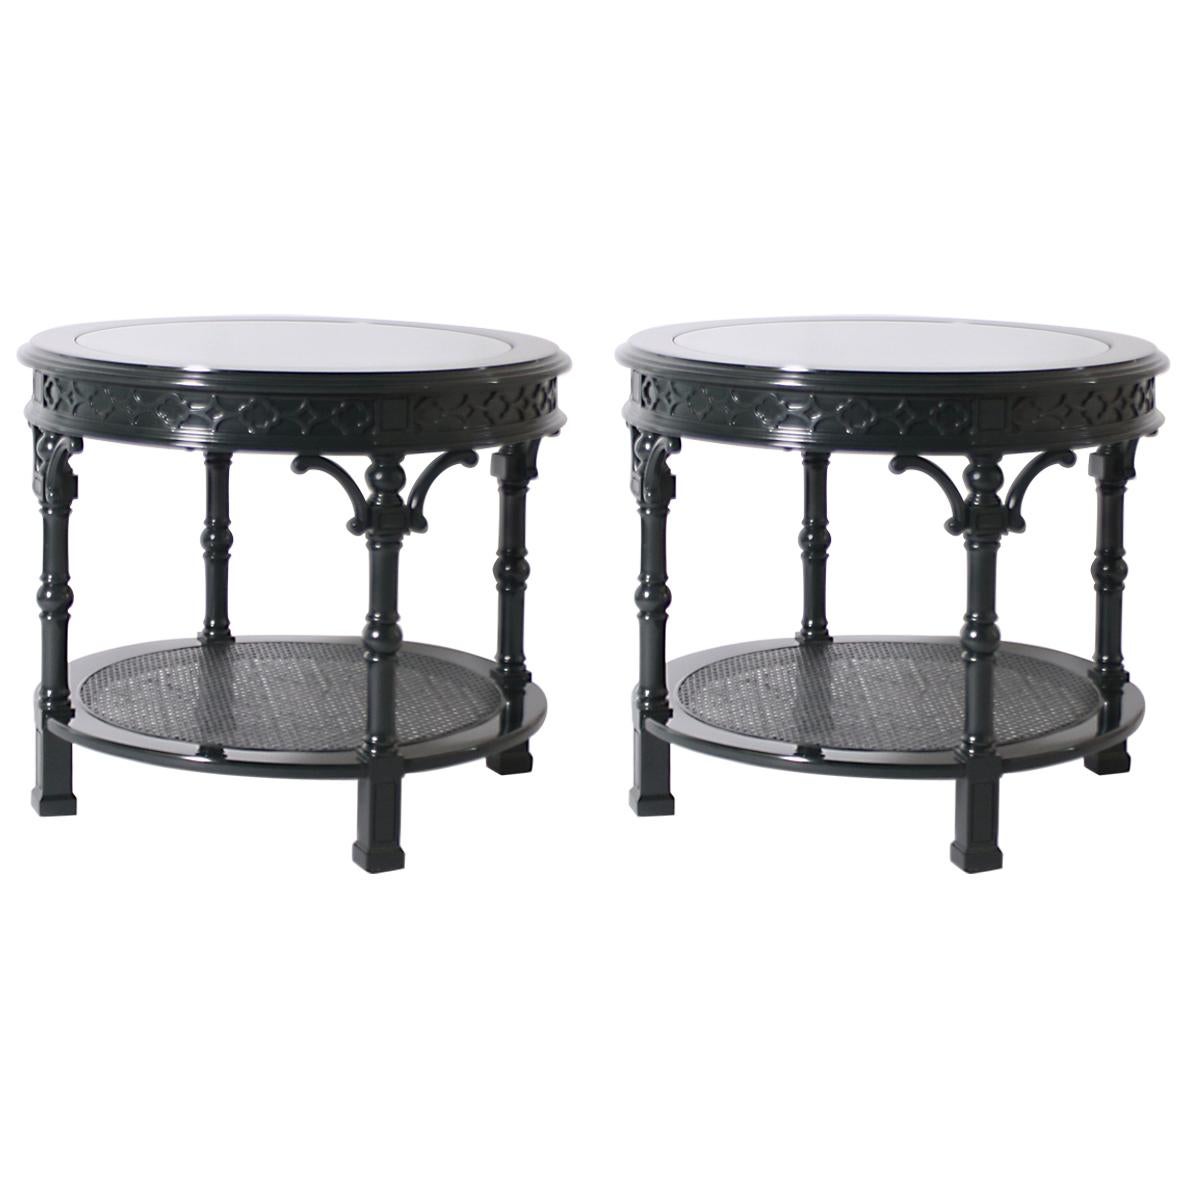 Pair of Round Lacquered Side Tables with Glass Top Inserts, circa 1970